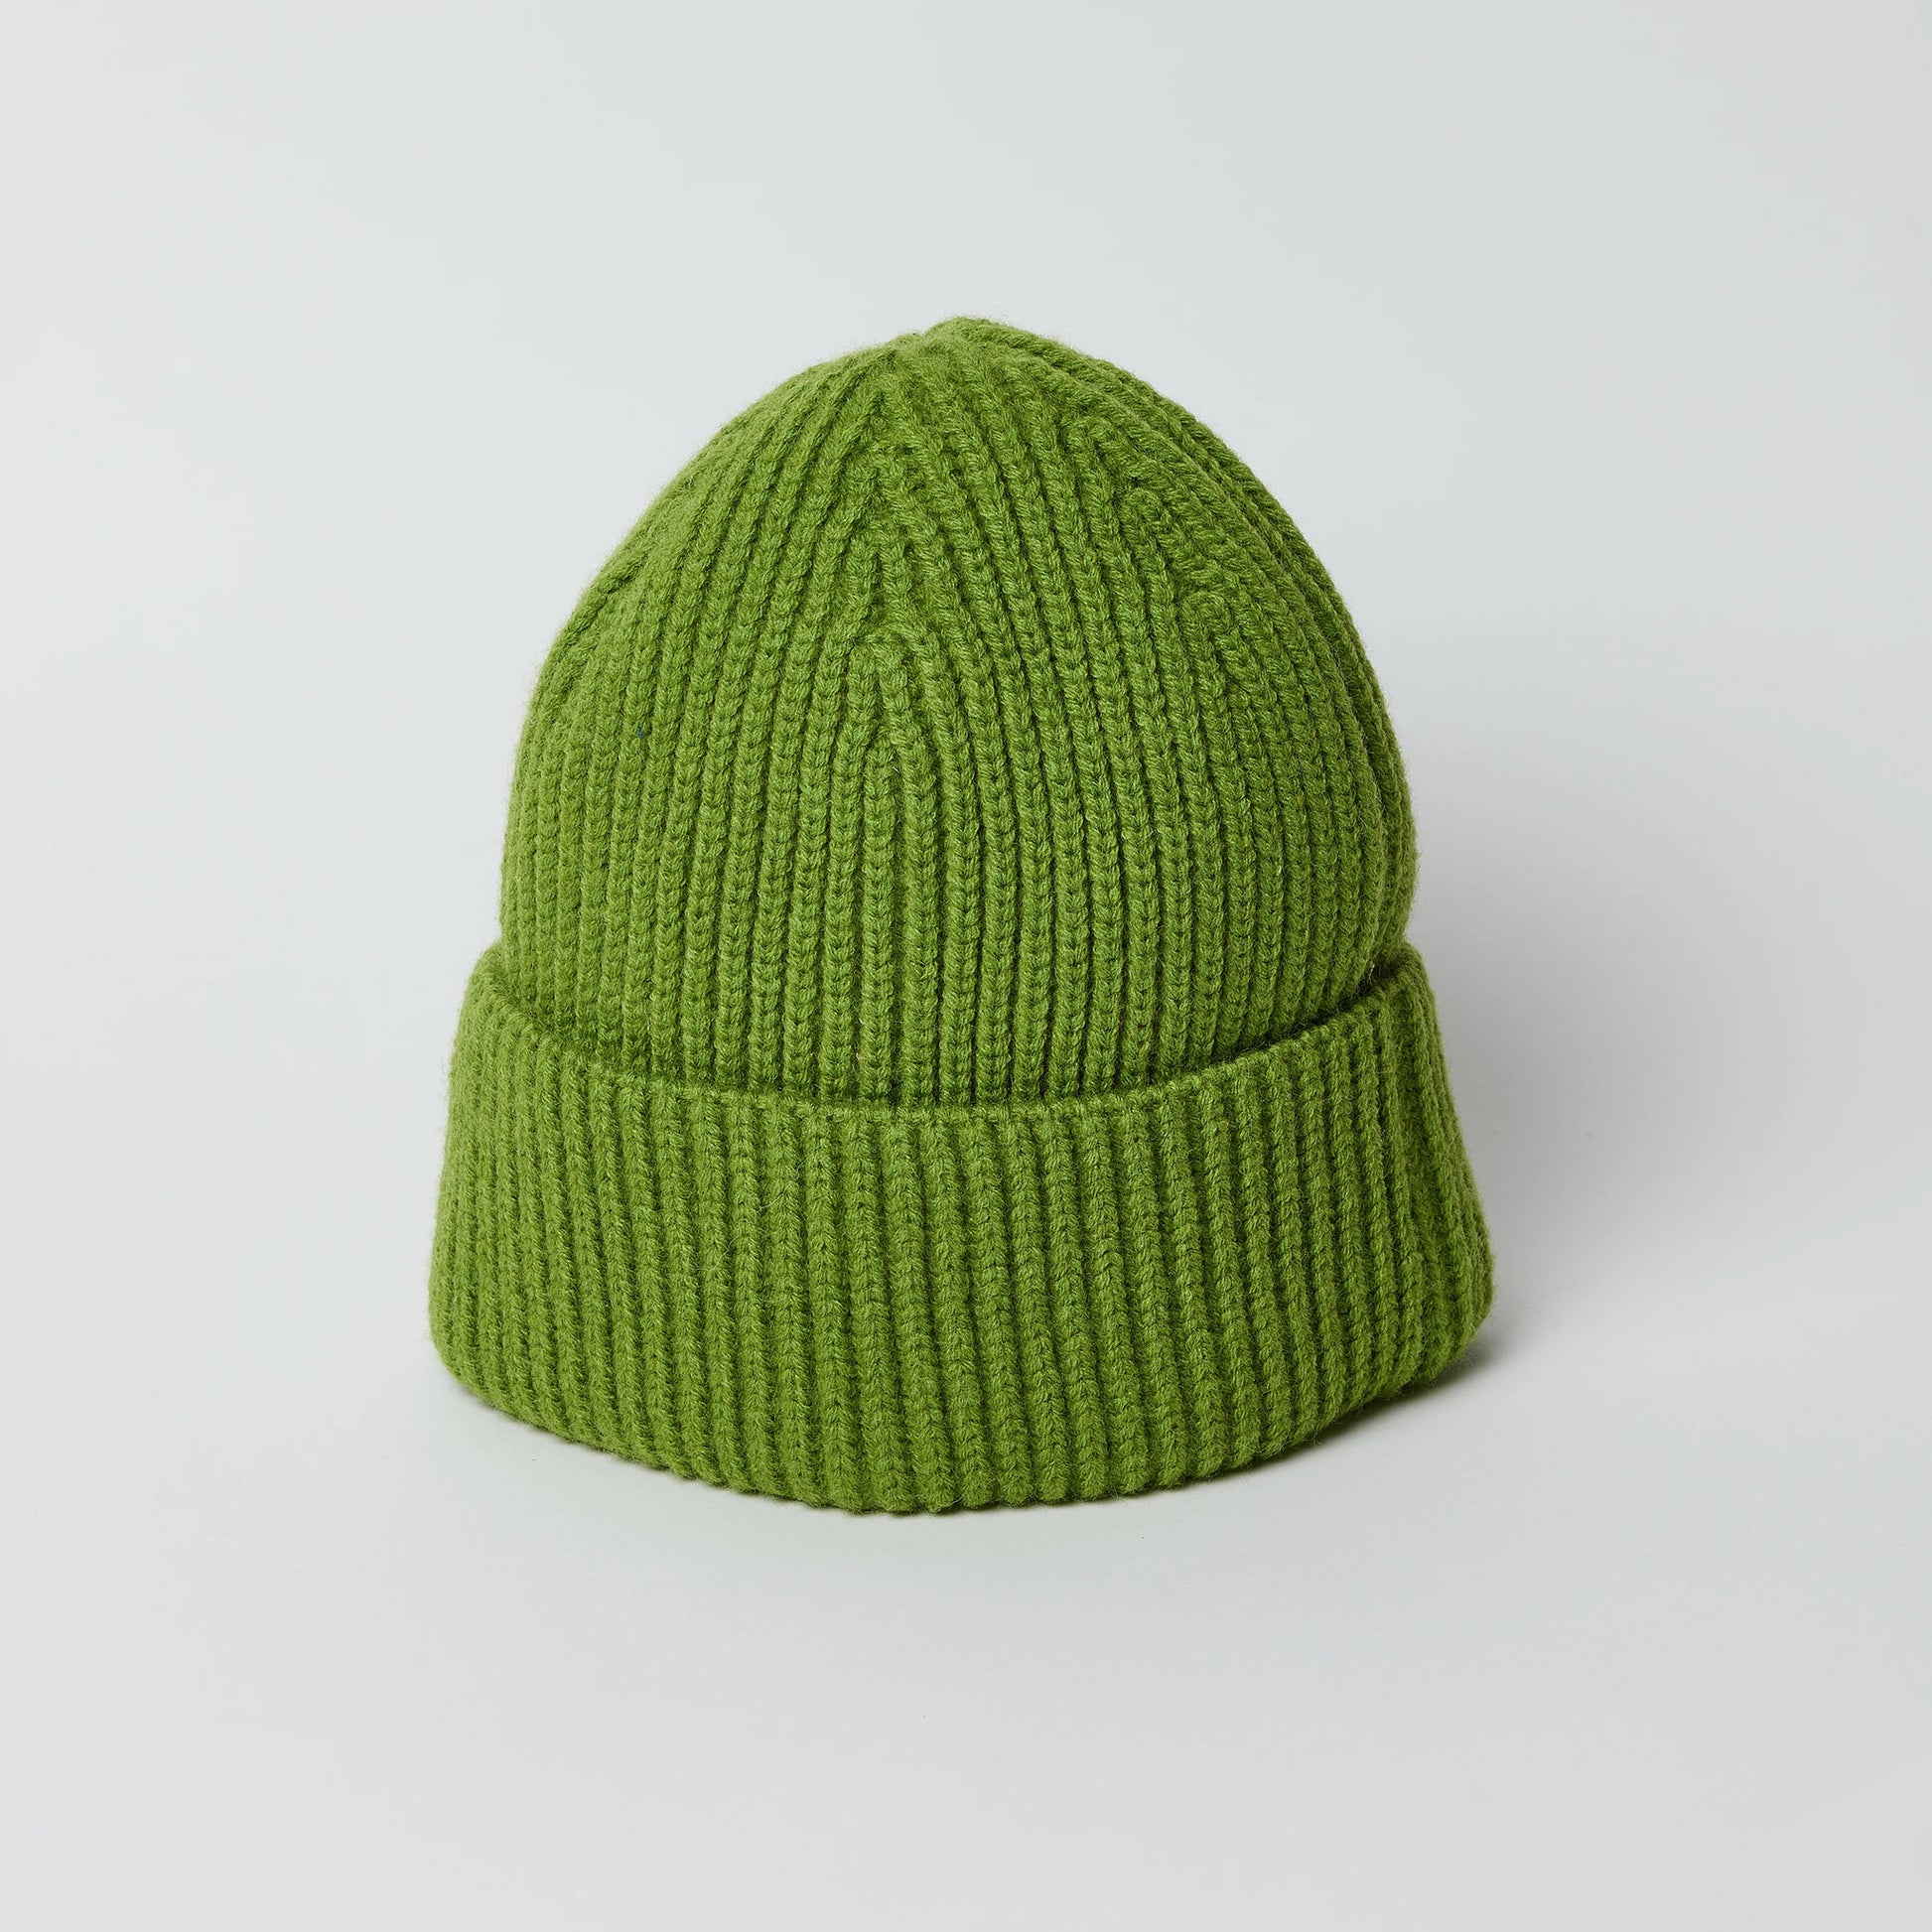 Match Rib Beanie Hat (Select Color) Green